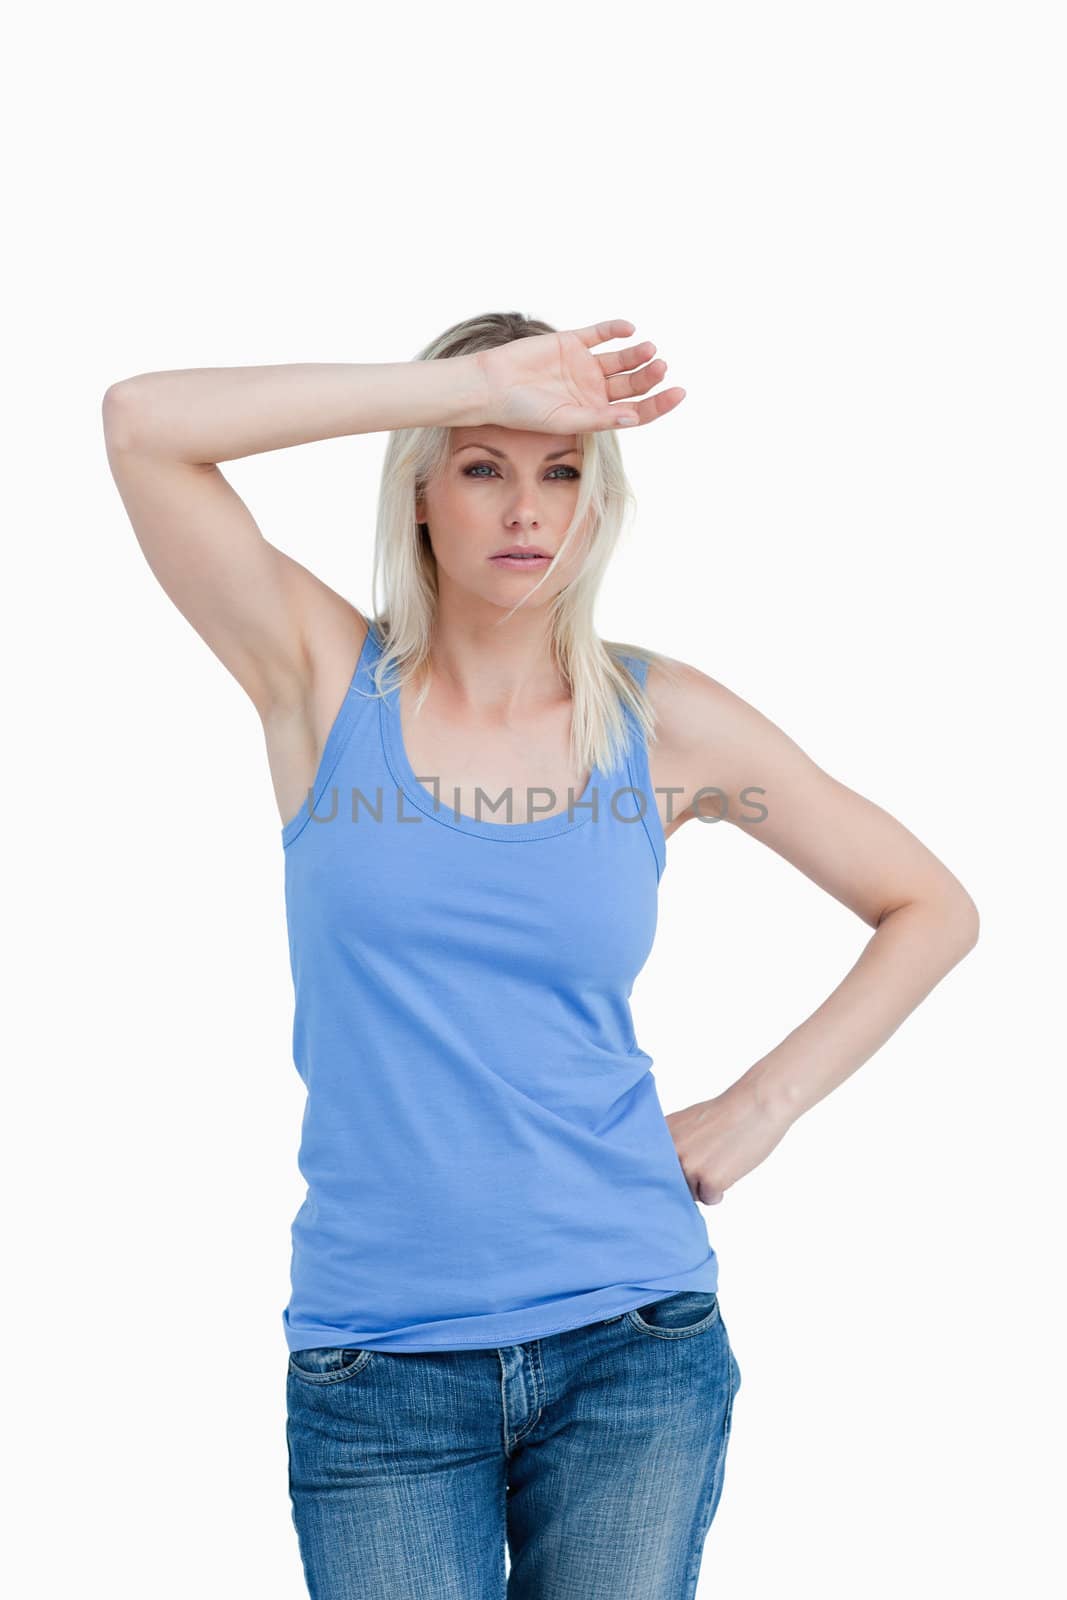 Sad blonde woman putting her hand on forehead against a white background